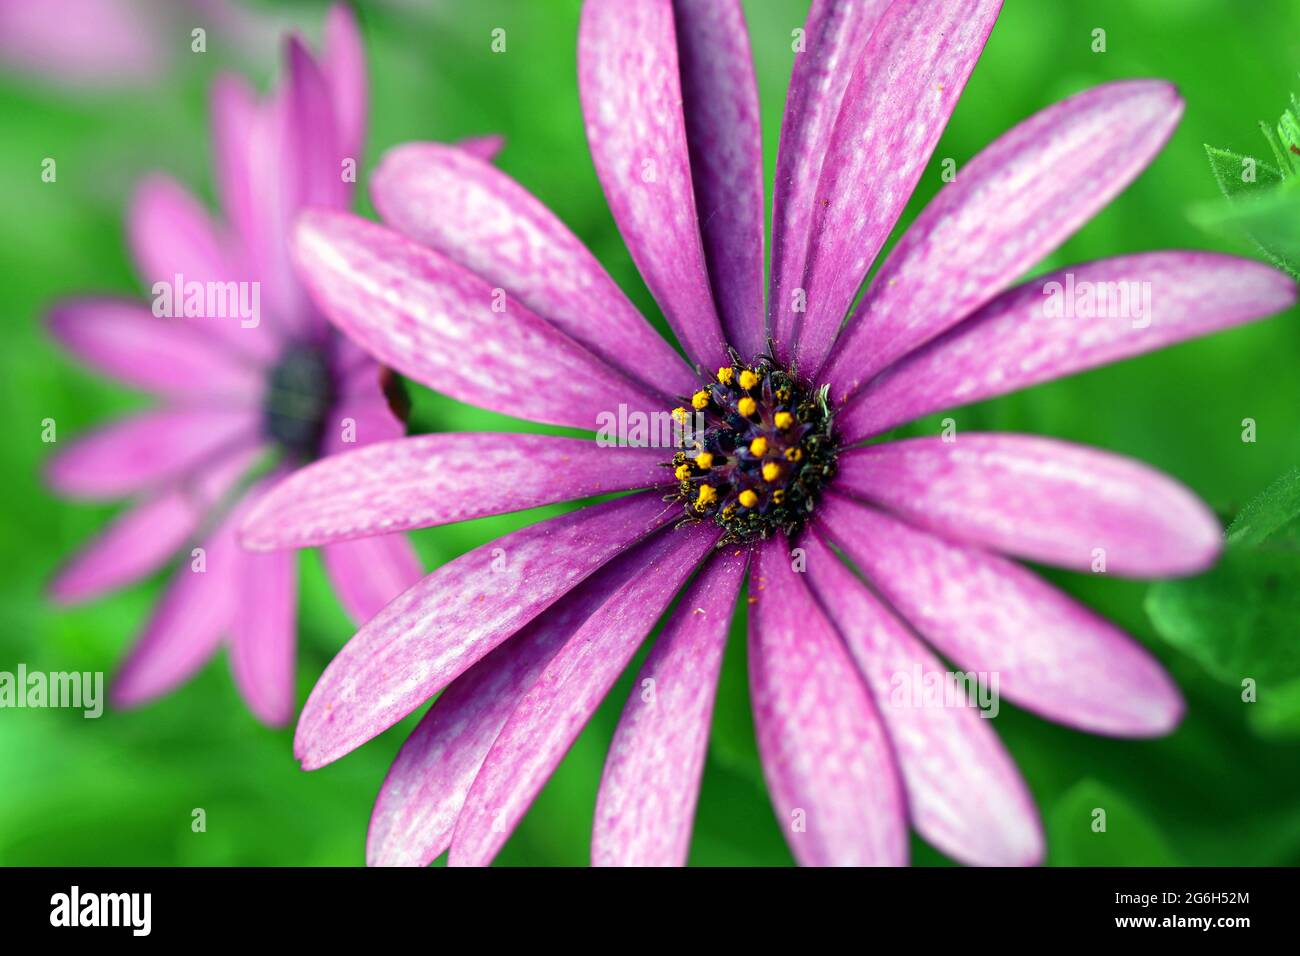 Full frame image of a purple African Daisy showing the deep purple central disc of tiny flowers (florets).  Photographed in an English garden in June Stock Photo